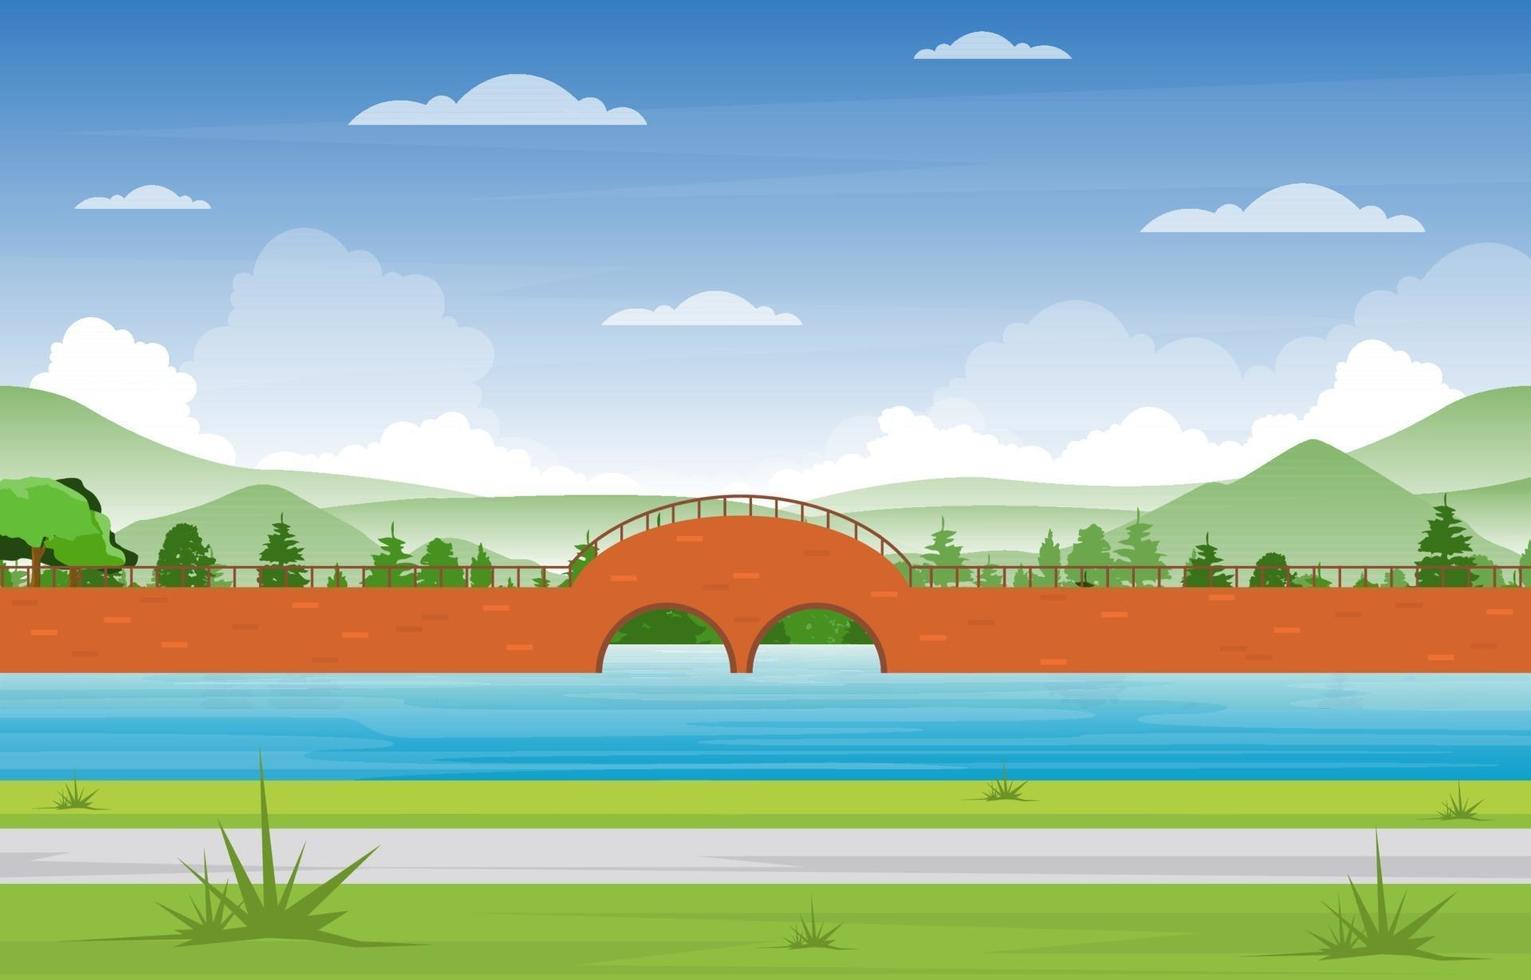 Bridge with Park, Trees, and River Illustration vector